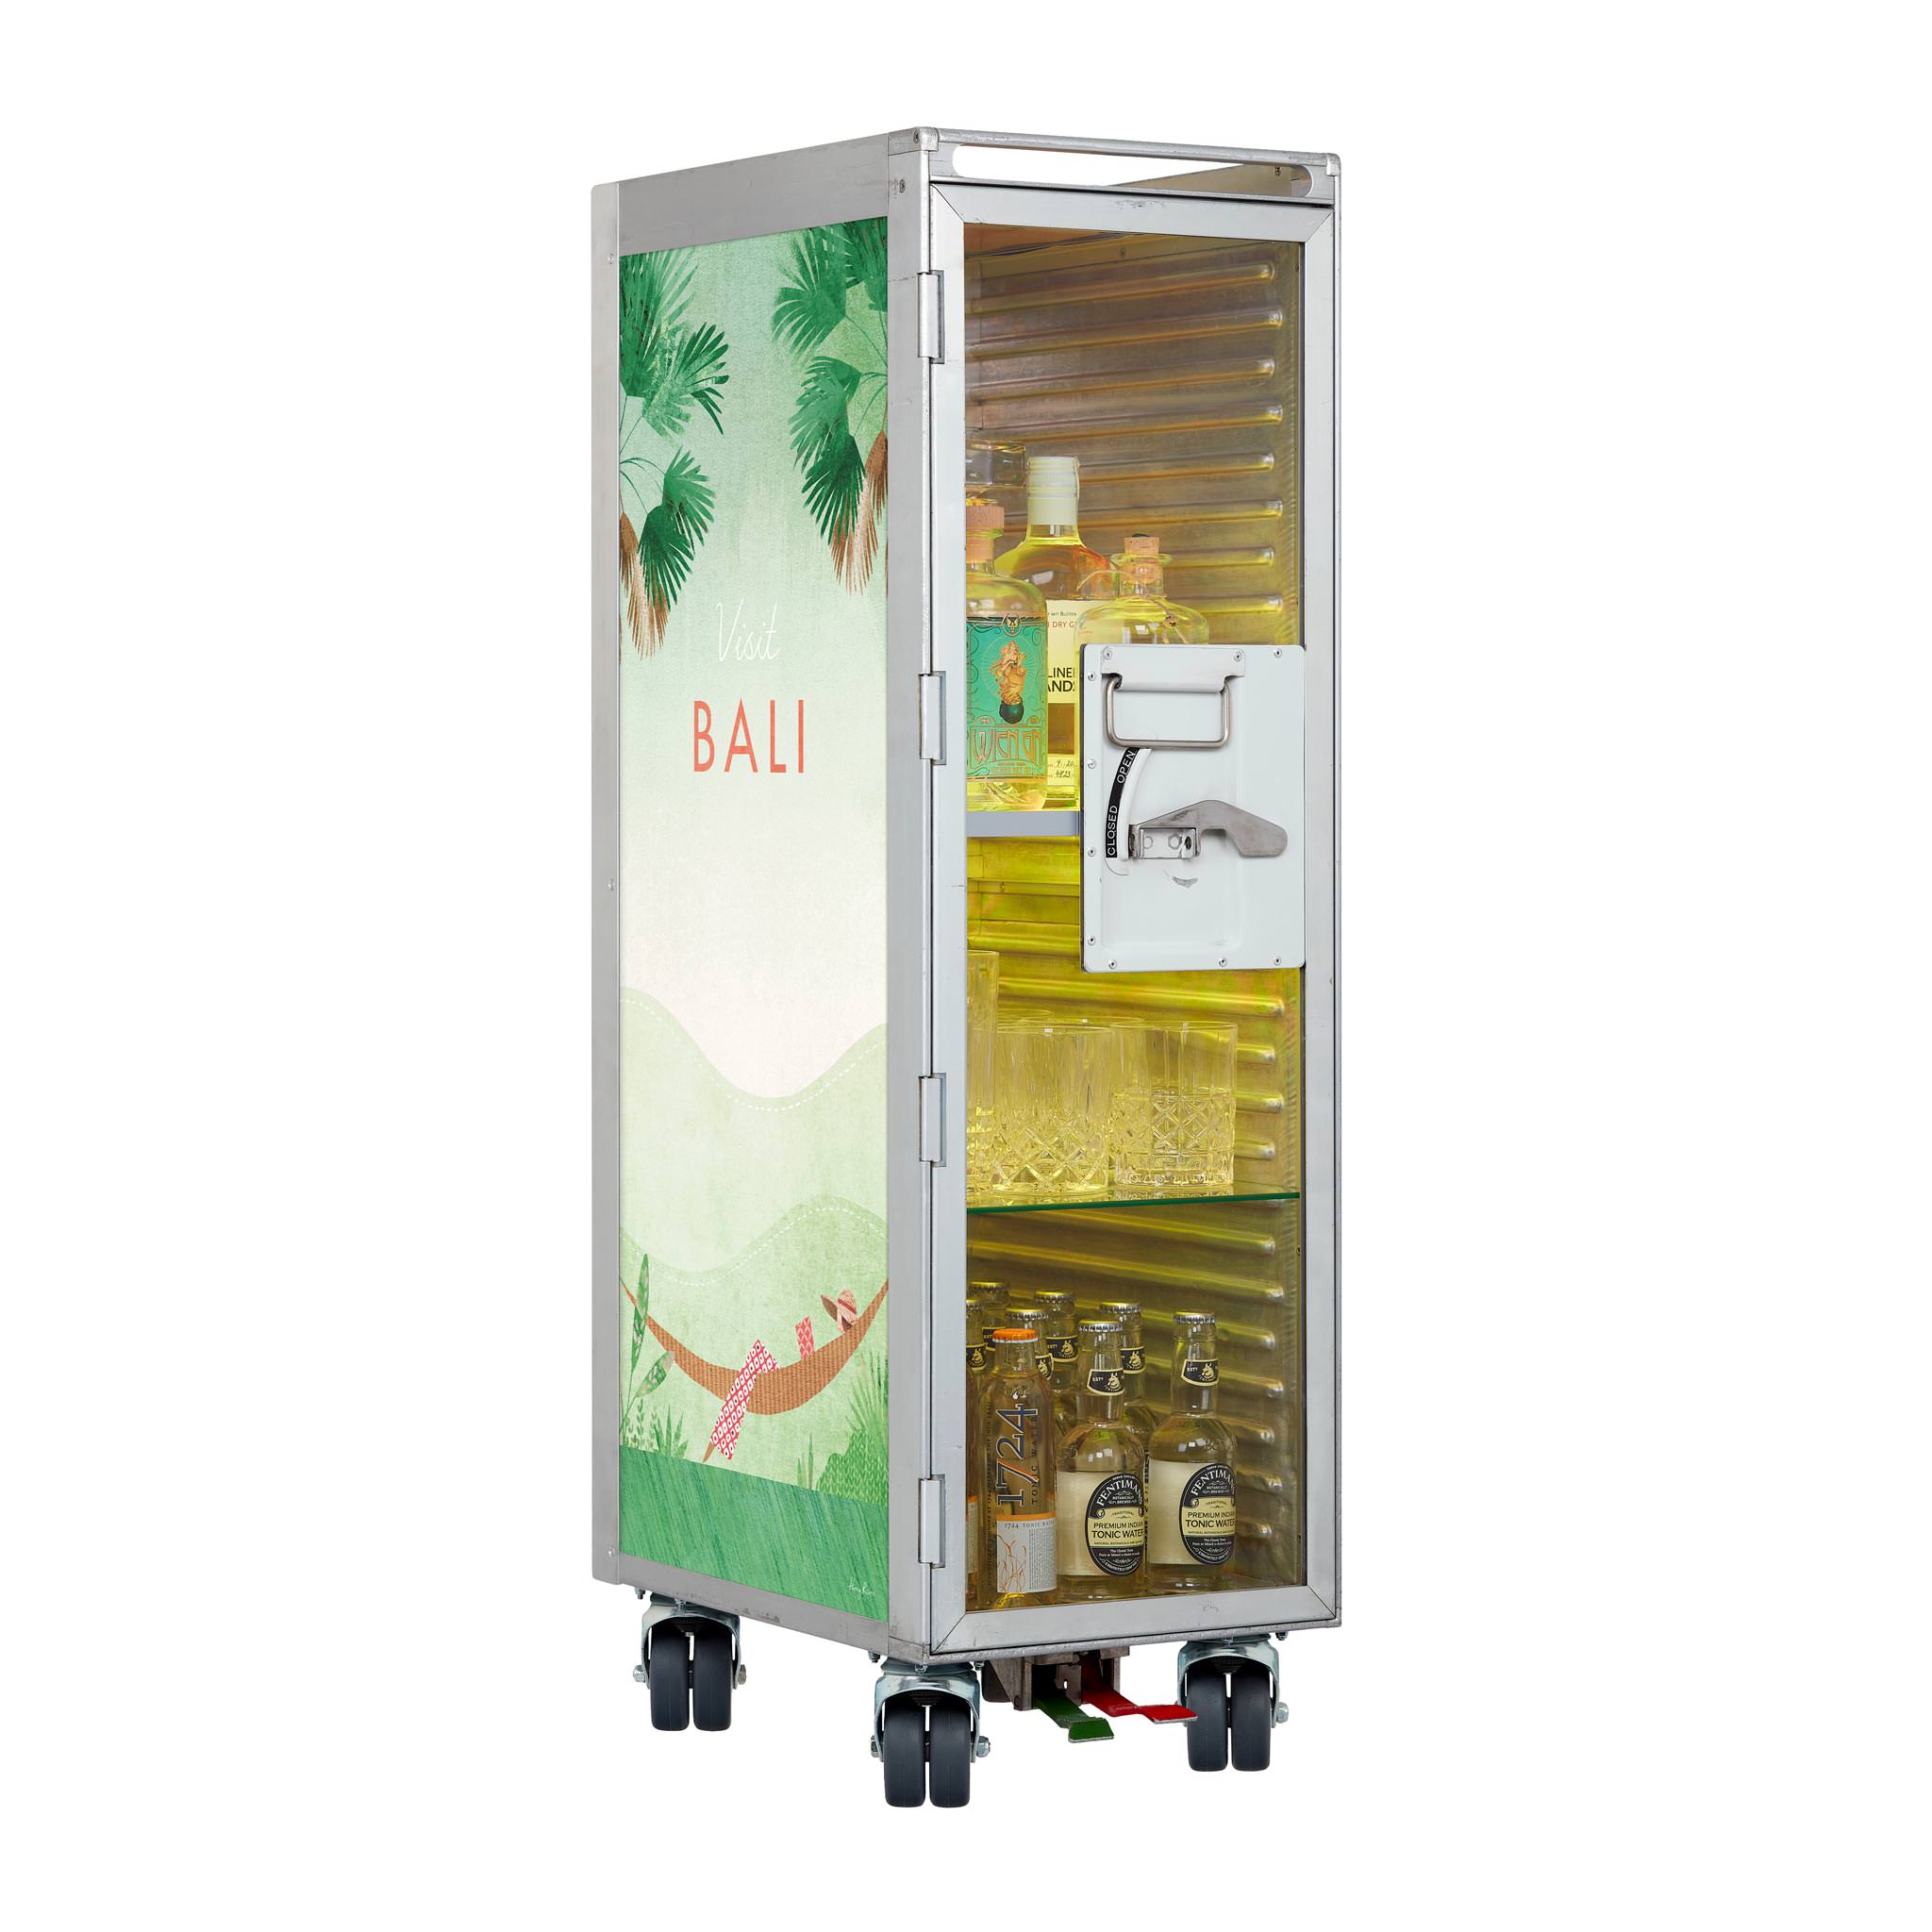 Airline Cart Bar Henry Rivers Edition Visit Bali with new Castors incl. LED Shelf, small Cutting Board & Glass Shelf